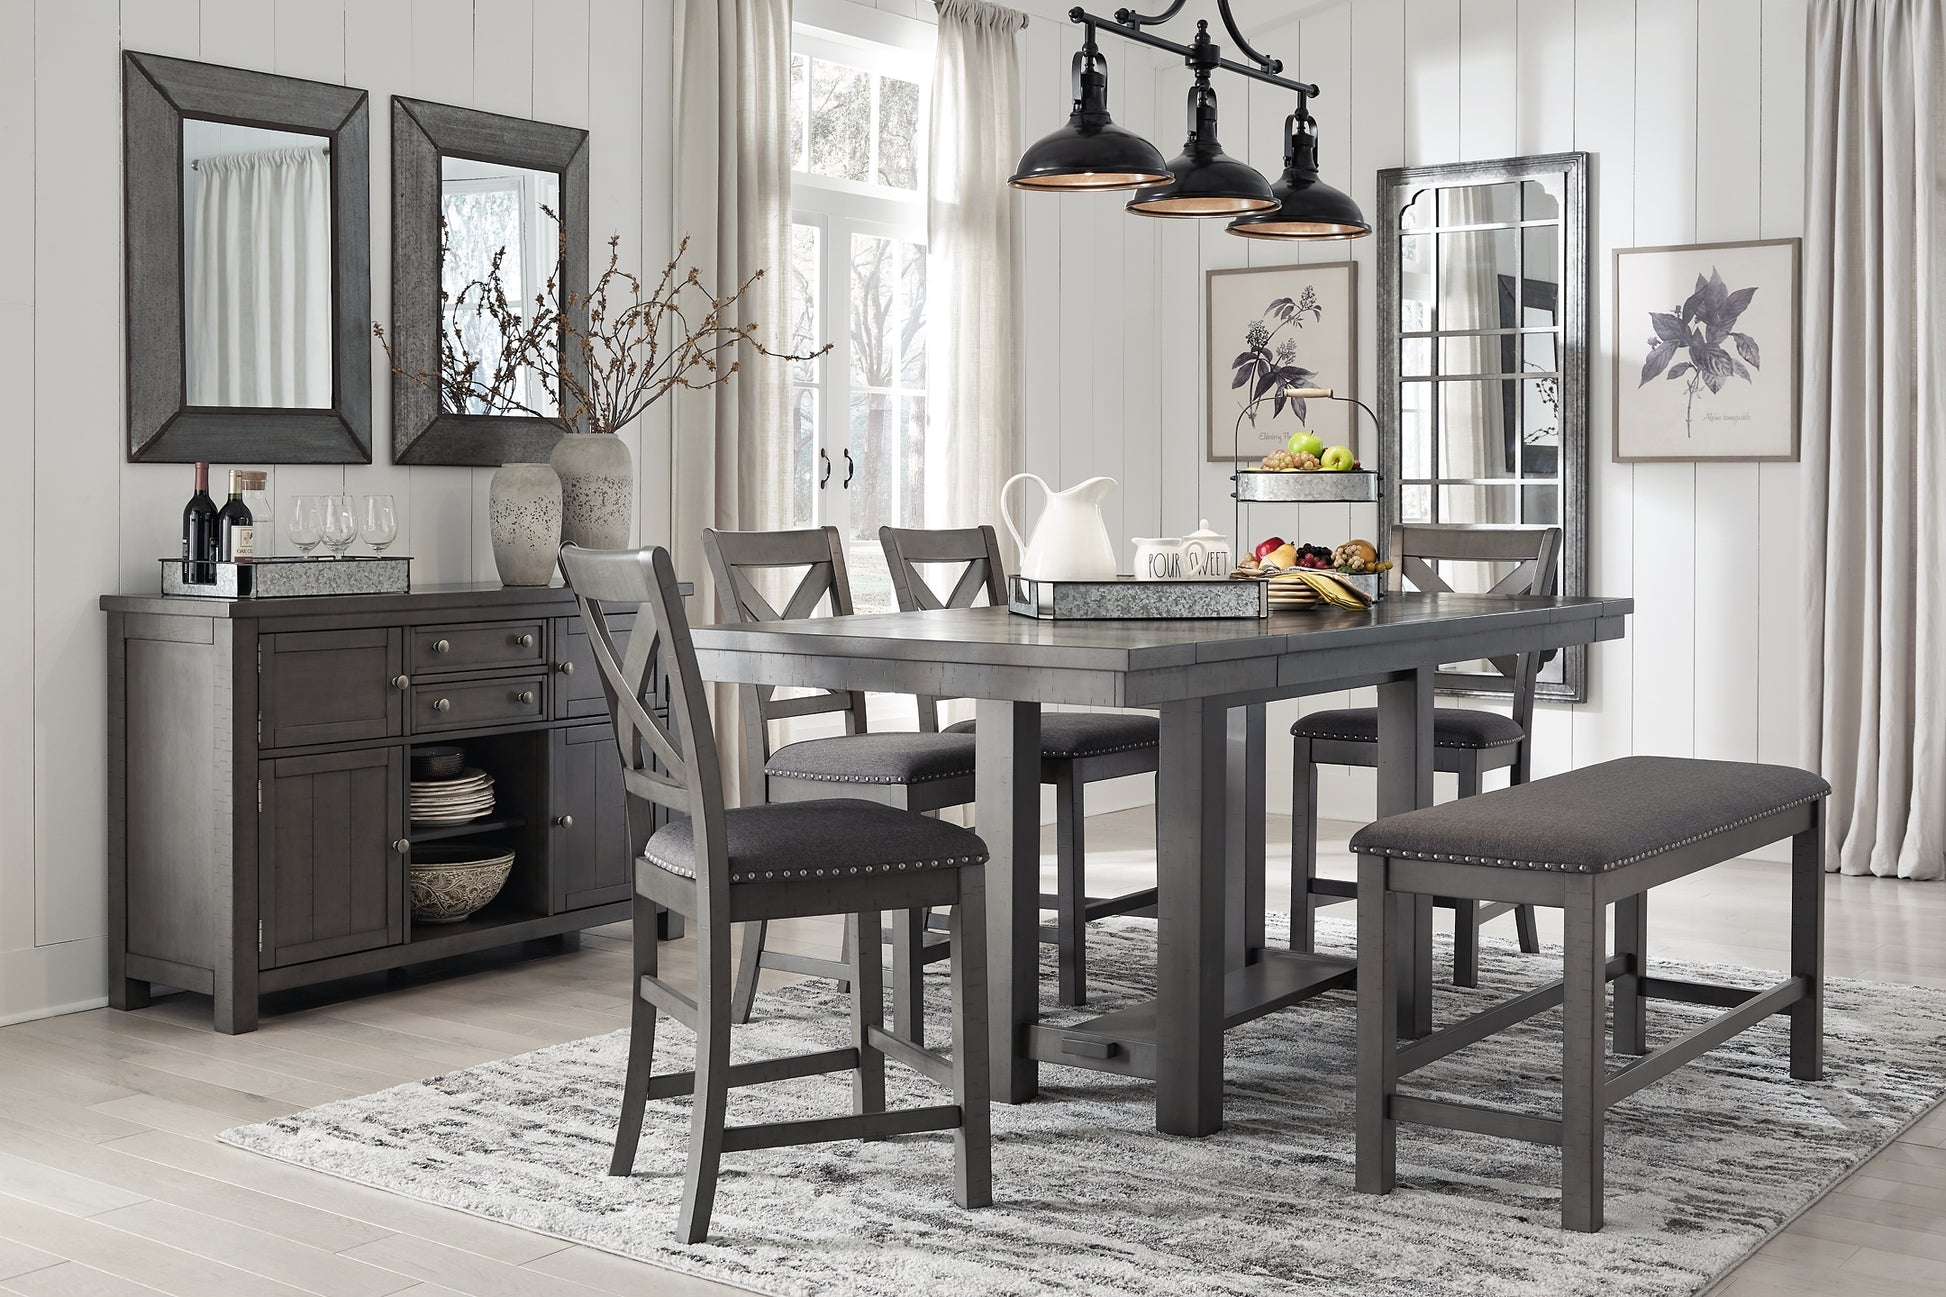 Myshanna Counter Height Dining Table and 4 Barstools and Bench with Storage Wilson Furniture (OH)  in Bridgeport, Ohio. Serving Bridgeport, Yorkville, Bellaire, & Avondale